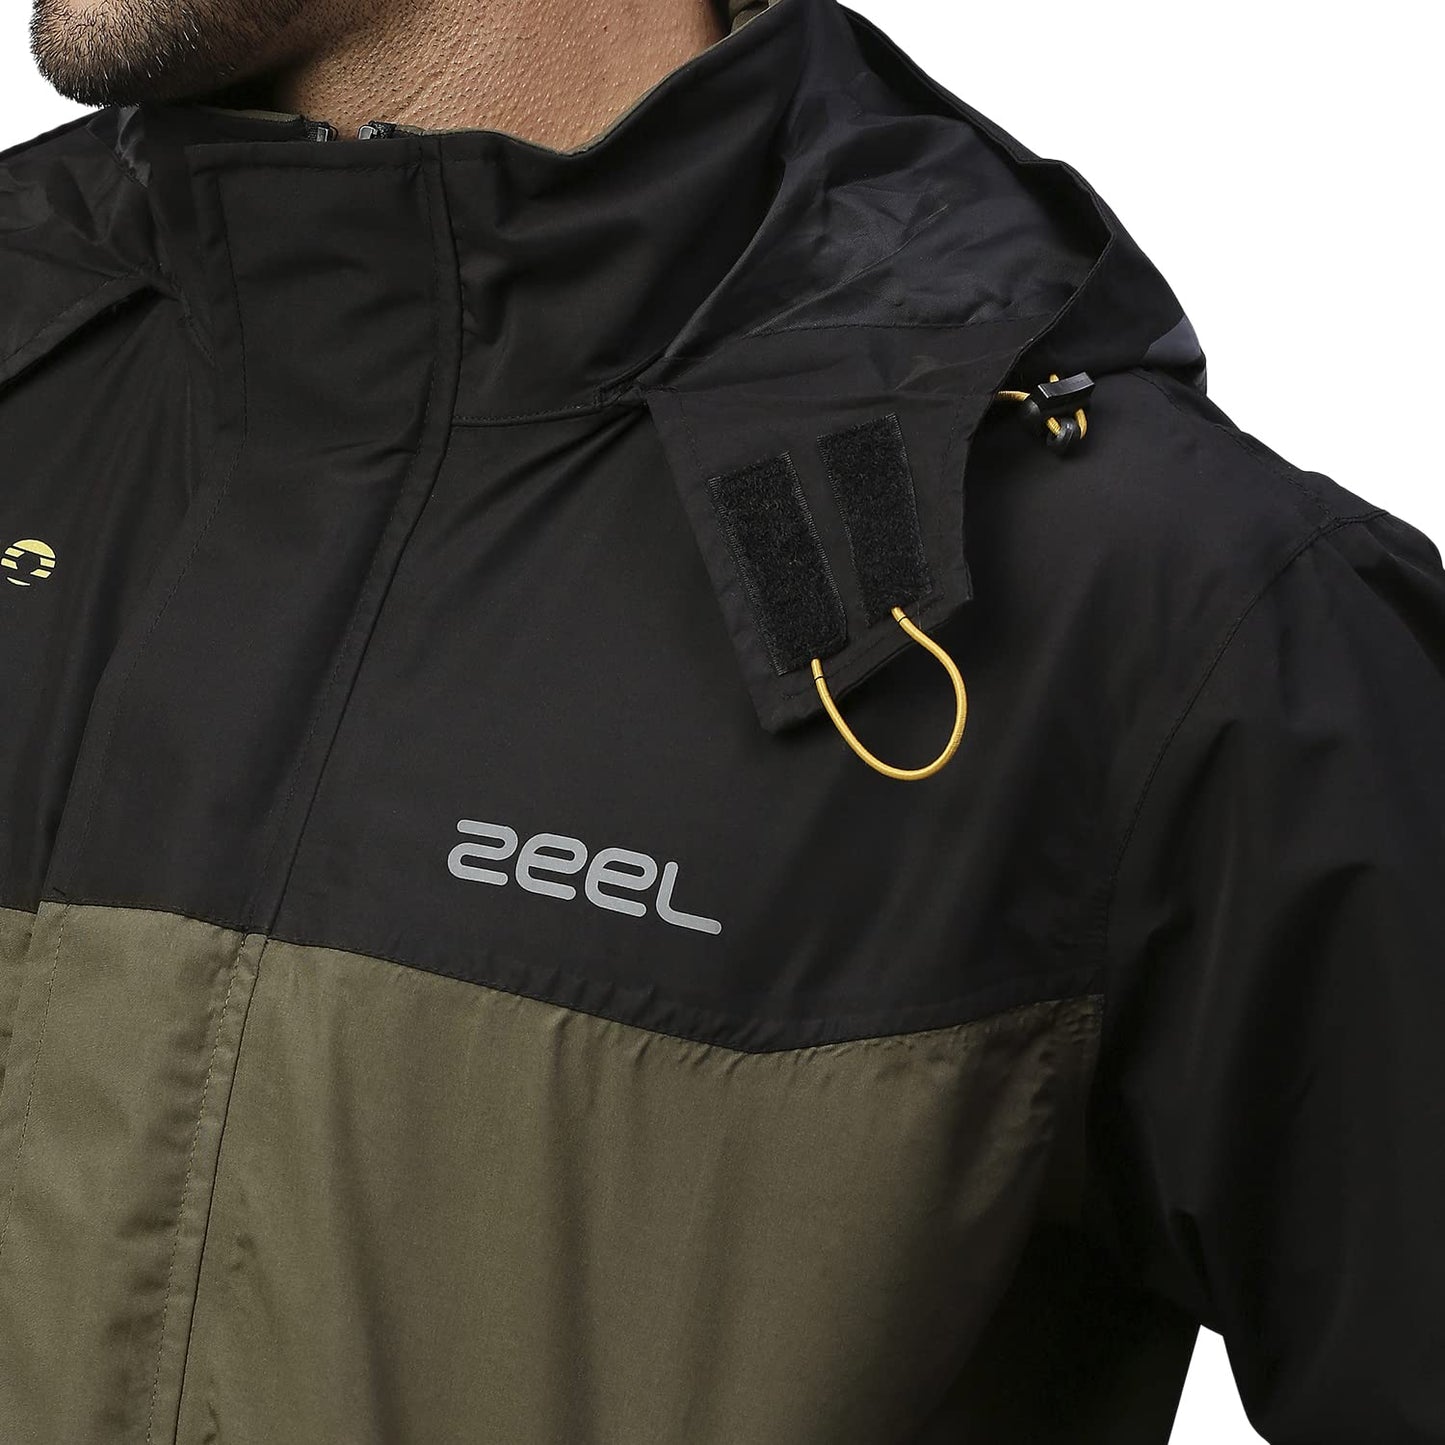 ZEEL Rain Coat for Men Waterproof for Bike Riders with Adjustable Hood along with inner pockets,Waterproof Raincoat with Polyester Jacket,Pants and Carrying Pouch,ZT5 BlackOlive XL